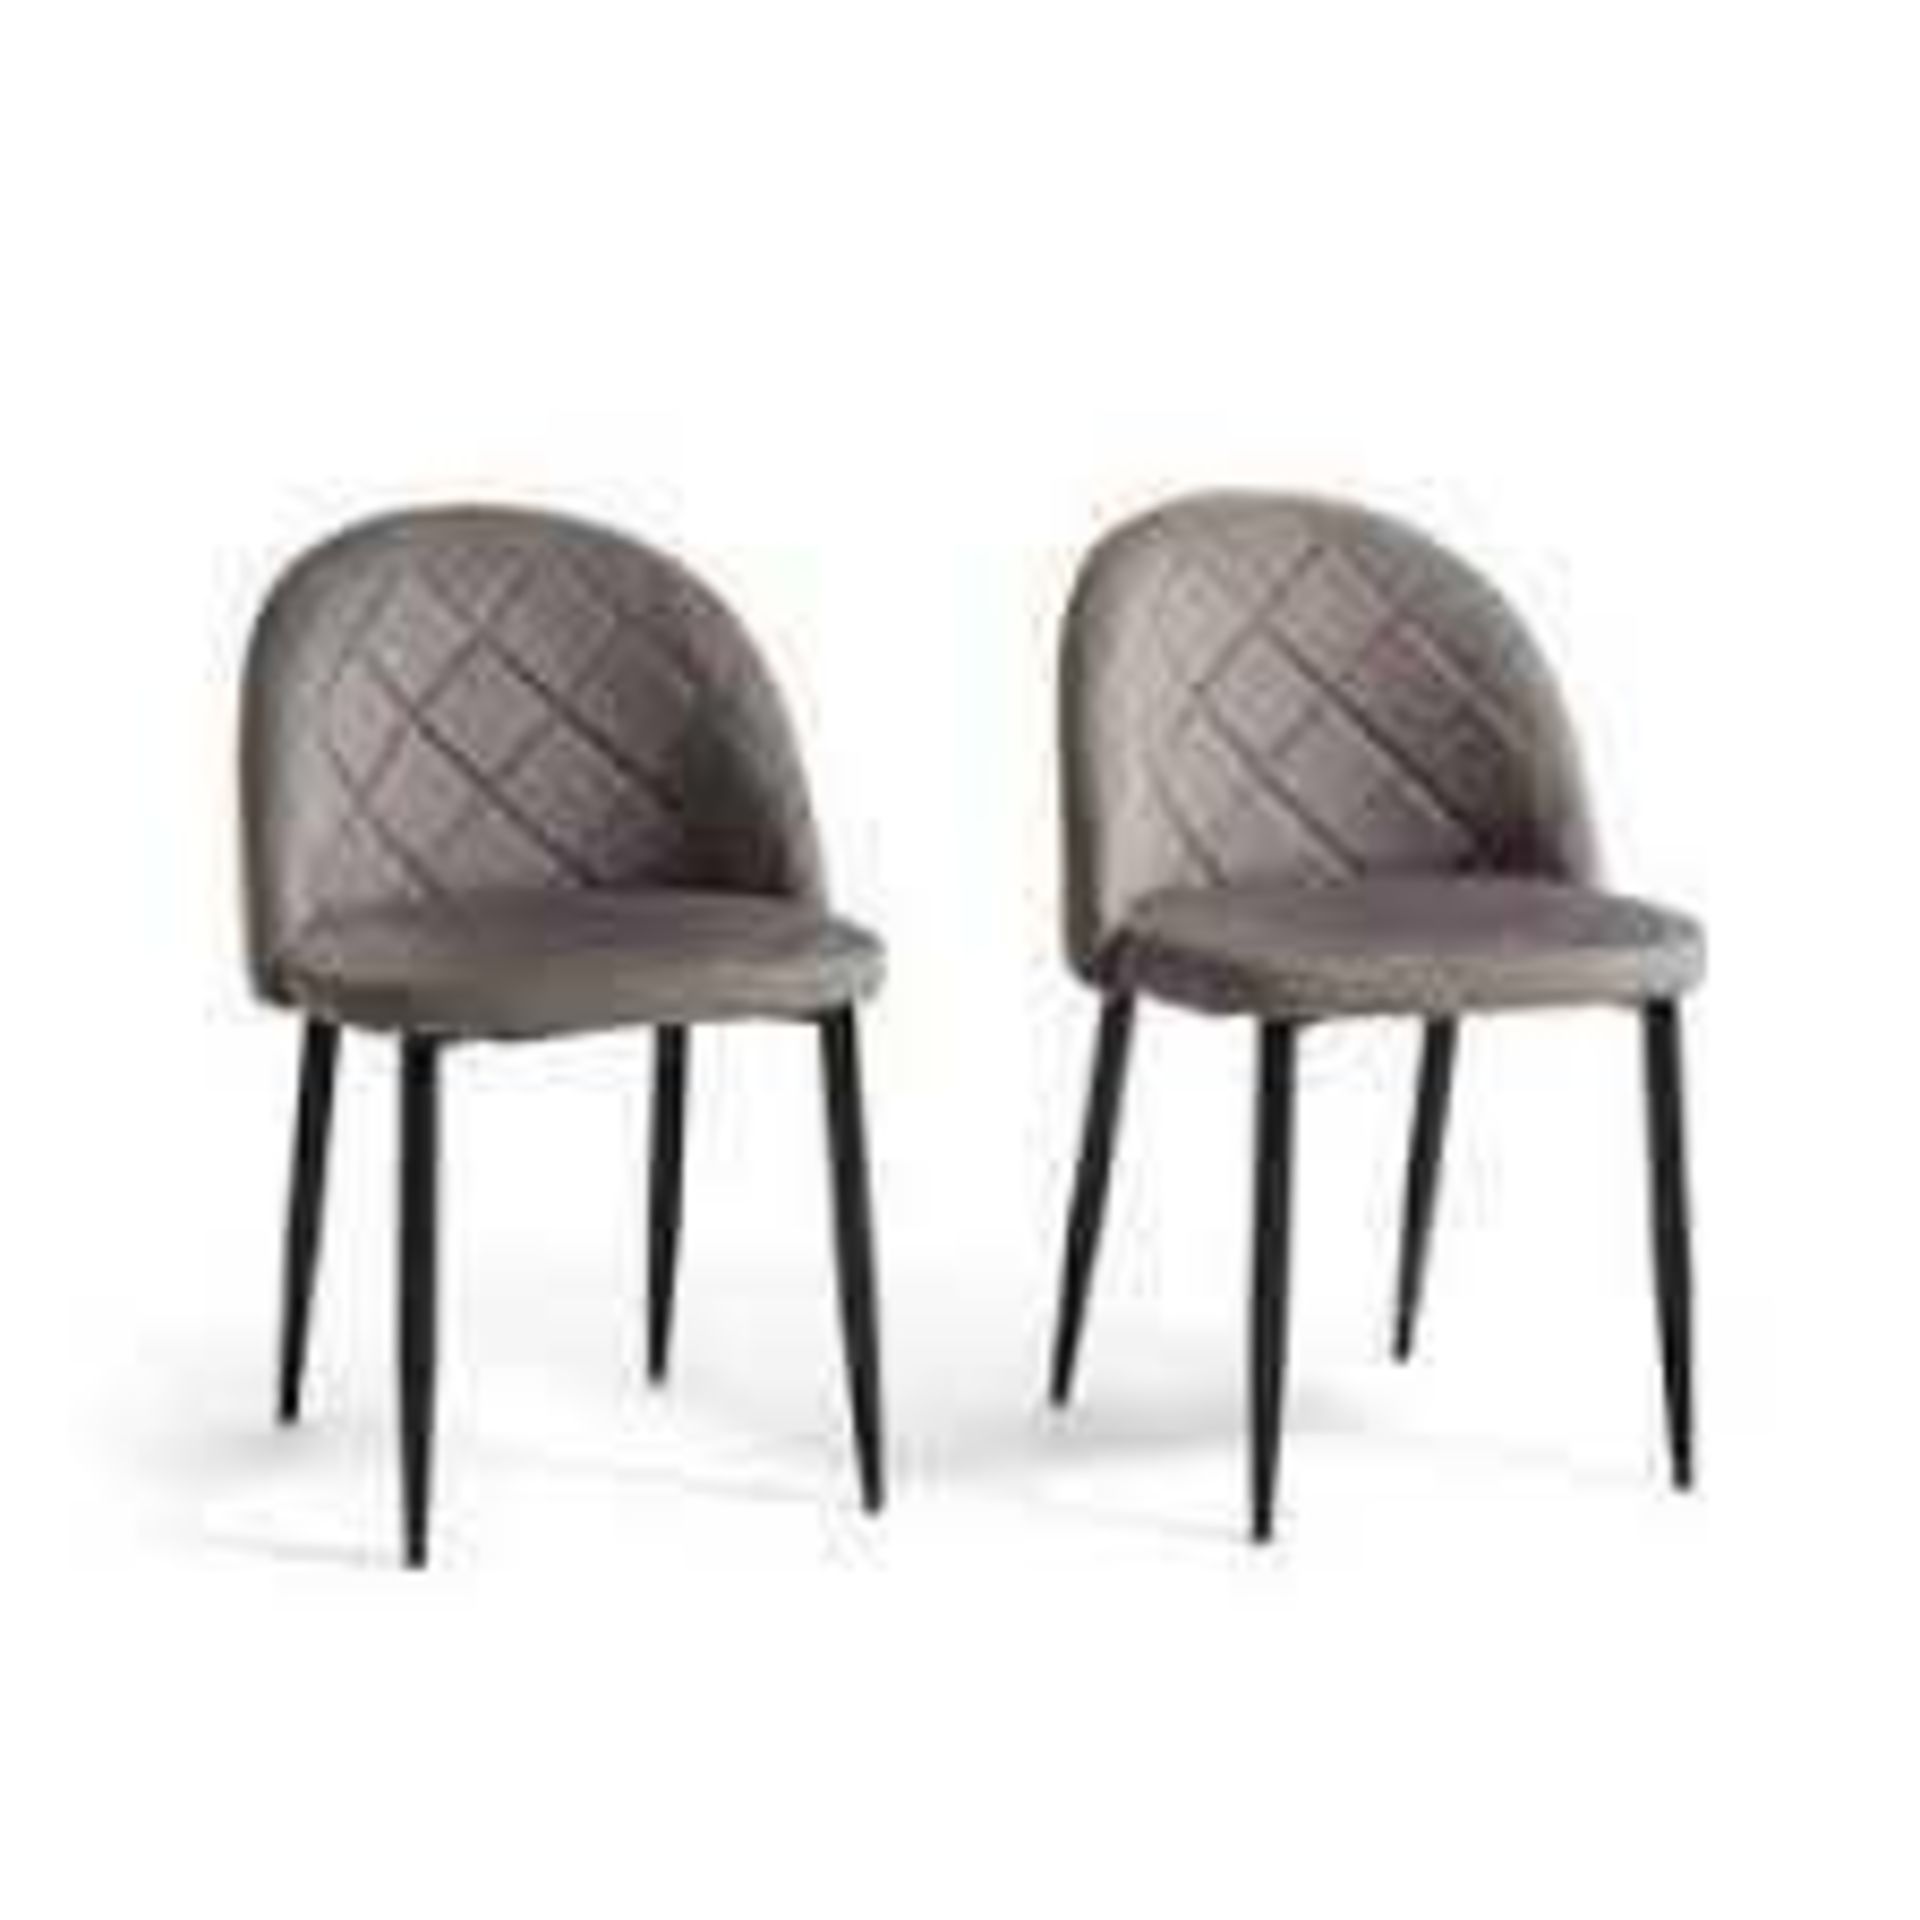 RRP £80 Unboxed Grey Velvet Alison Cork Chair(Used)(Wobbly)(H)